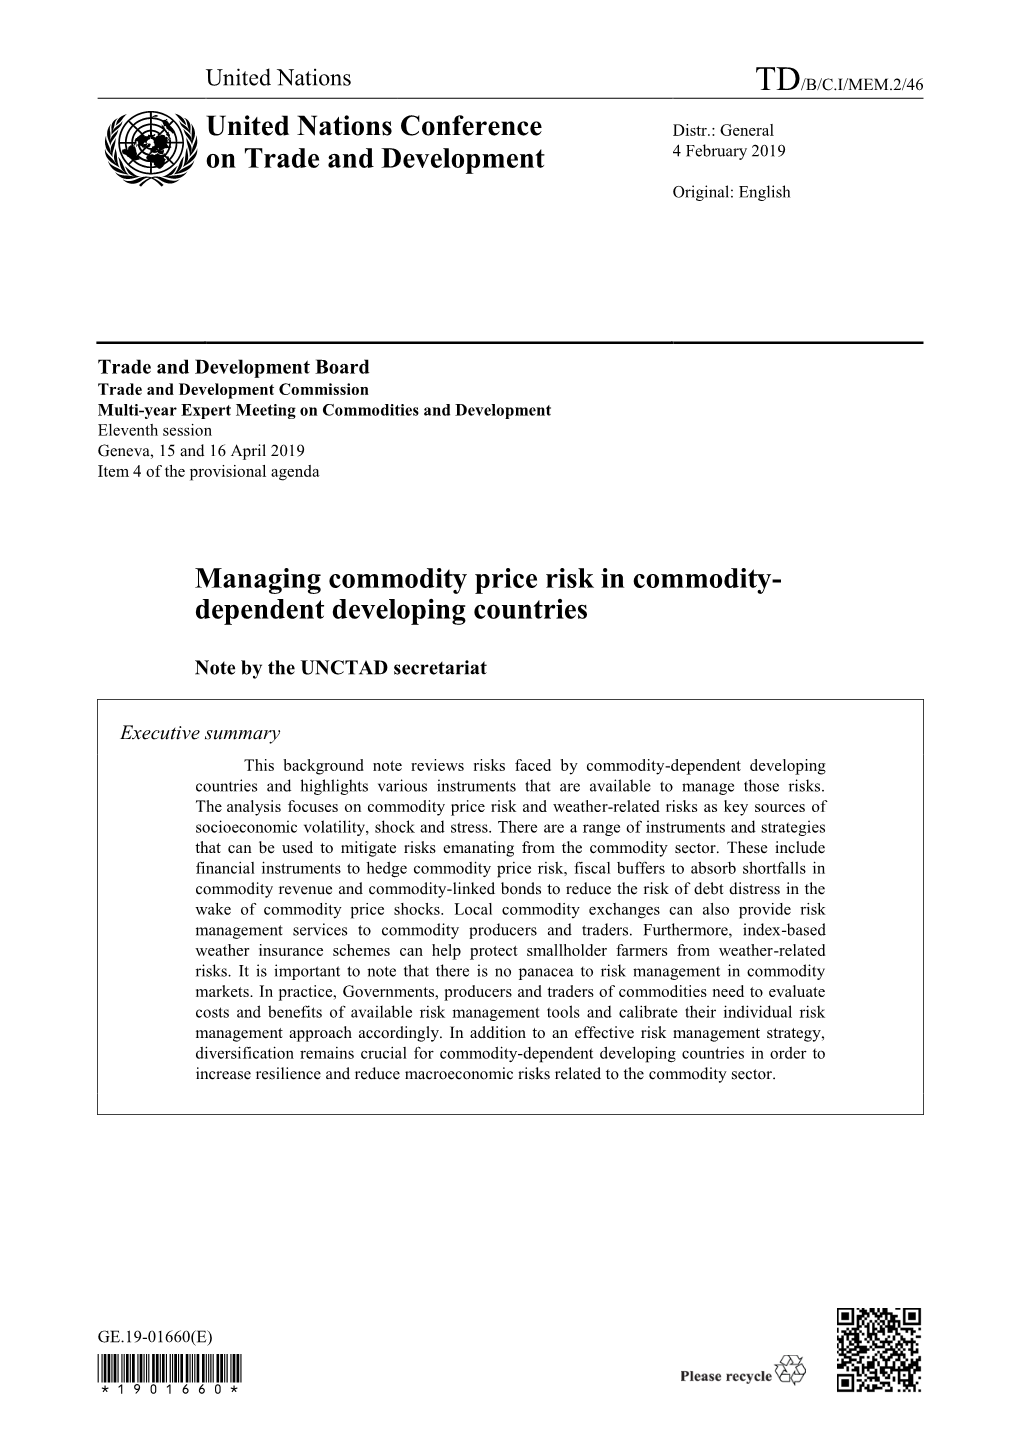 Managing Commodity Price Risk in Commodity-Dependent Developing